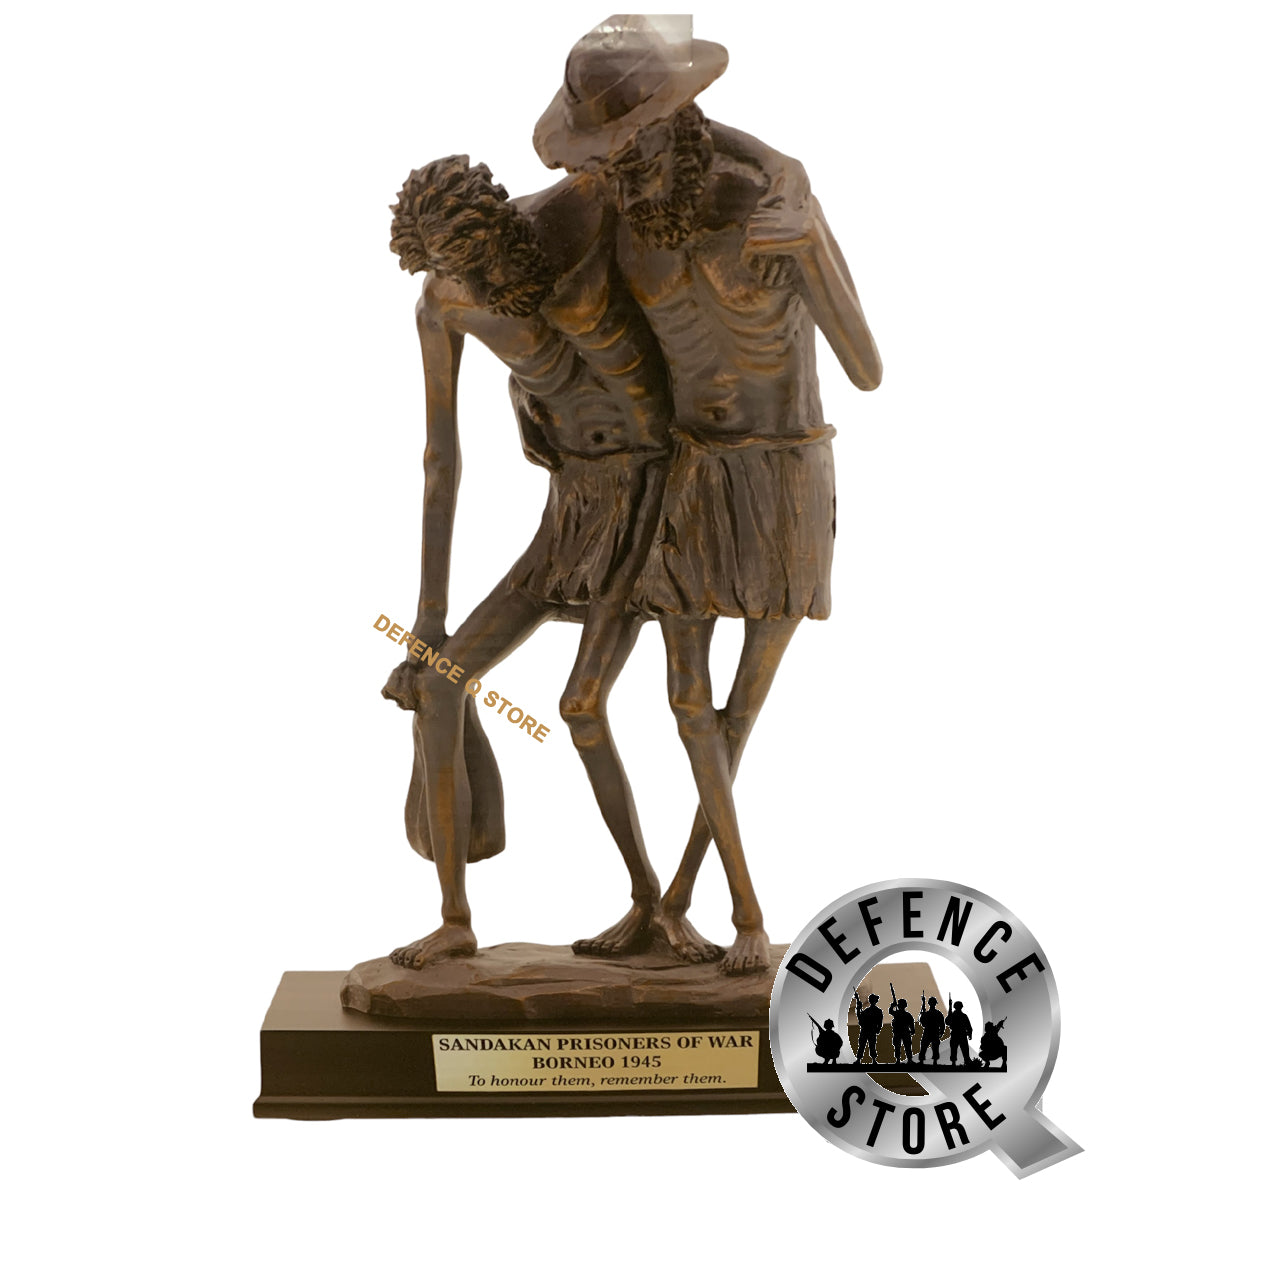 This figurine, commemorating the Sandakan prisoner of war camp in Borneo, pays tribute to the Australian and British victims of Japanese brutality in World War II. A solemn promise to remember the truth, it stands for all nations who lost loved ones to the cruelty of Japanese camps. www.defenceqstore.com.au